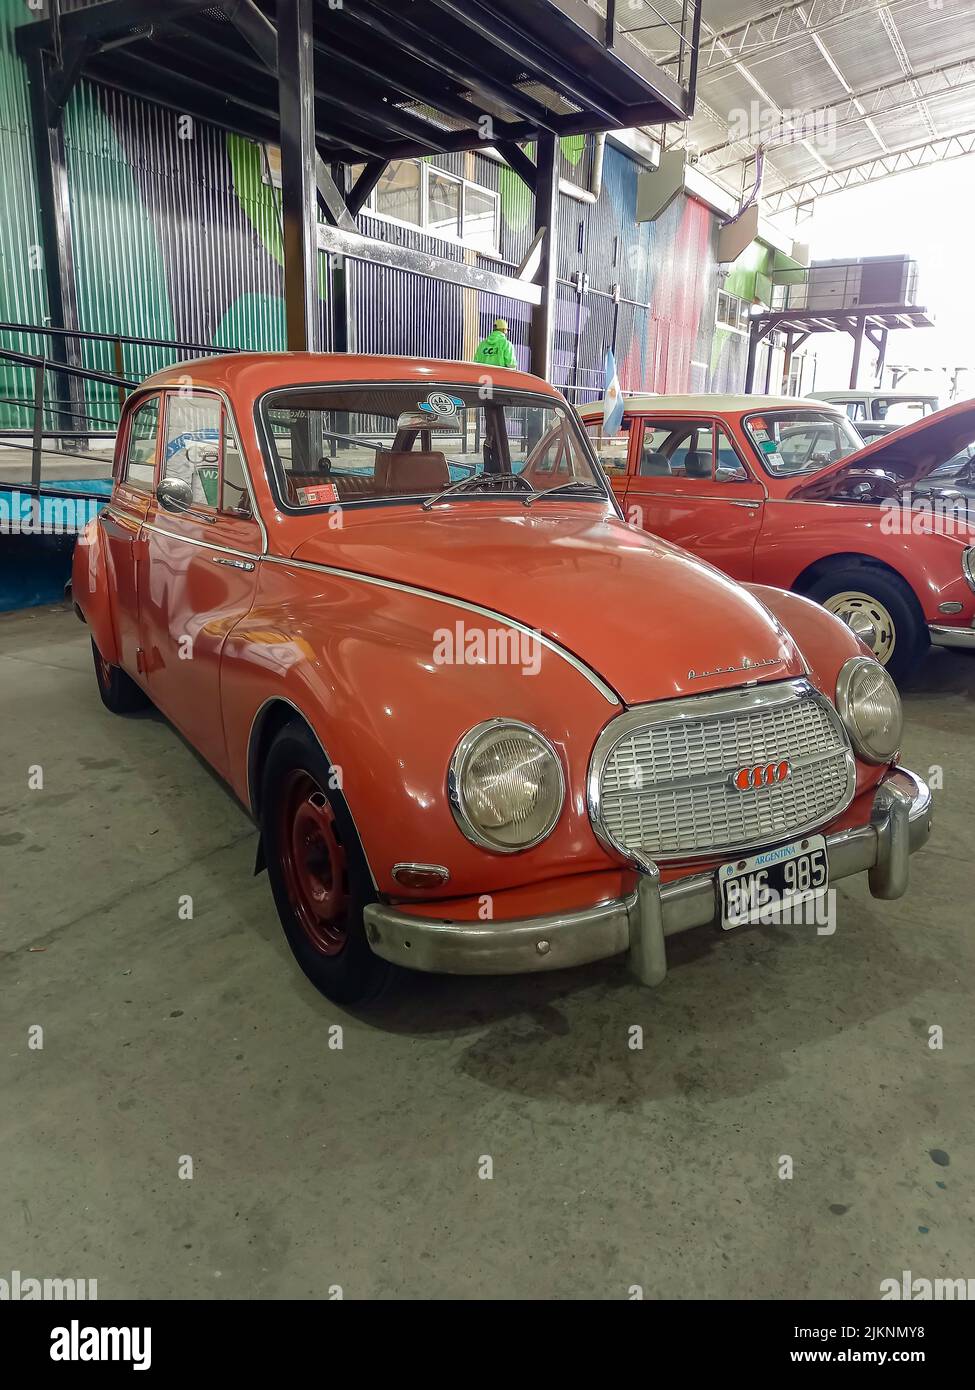 Avellaneda, Argentina - Apr 3, 2022: Old orange Auto Union DKW 1000 S four door saloon 1960-1970 parked in a warehouse yard. Front view. Classic car s Stock Photo